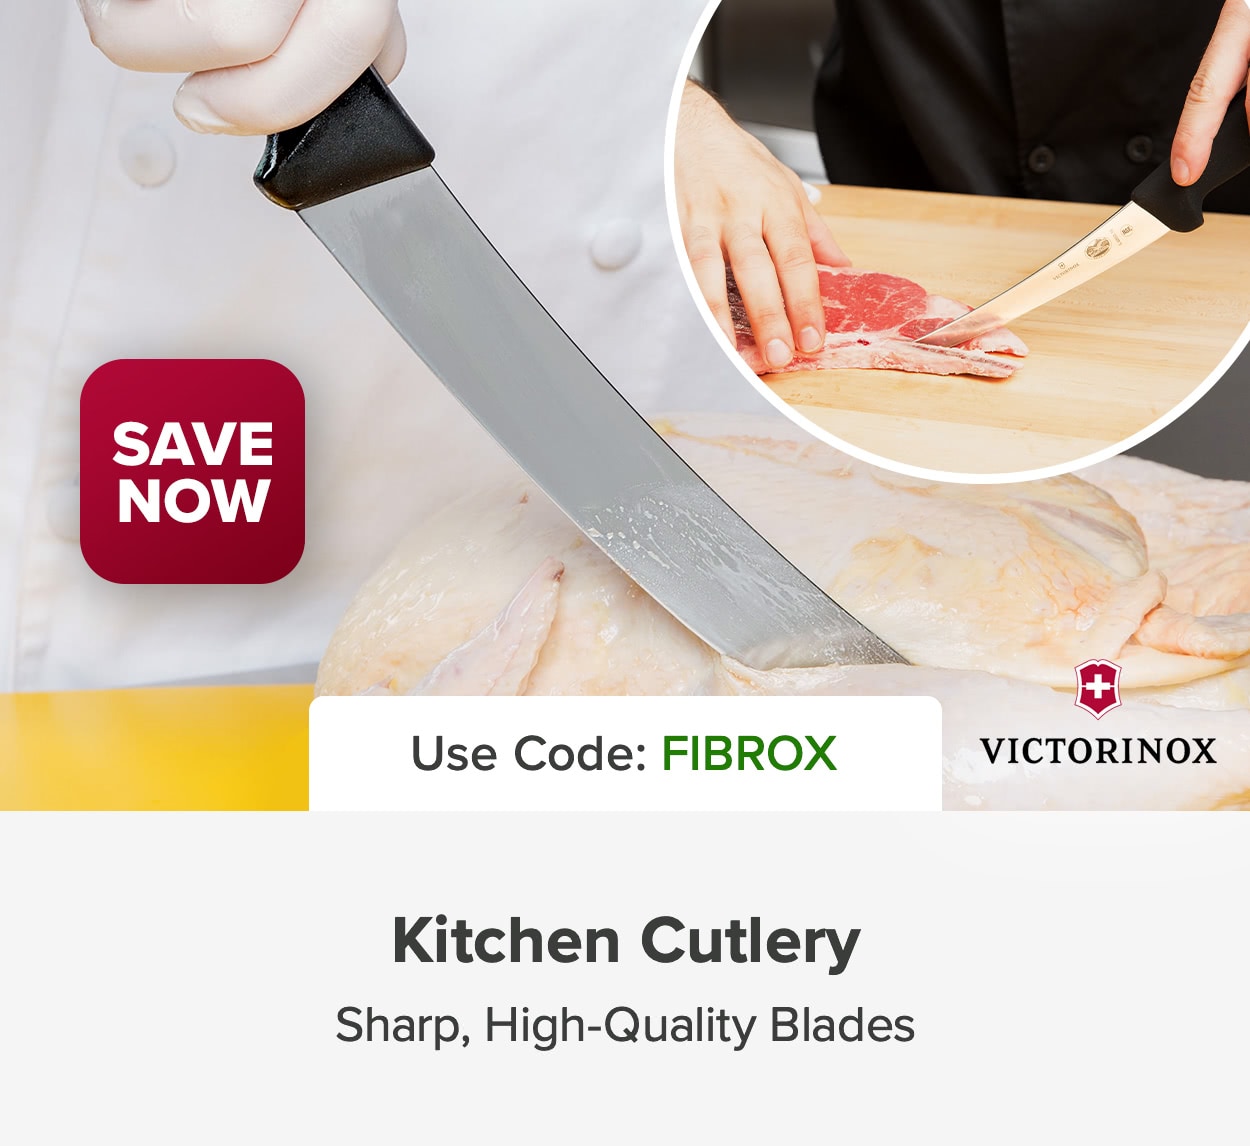 Equip Your Commercial Kitchen with Savings on Victorinox Boning, Bread, Chef, Carving, & Other Essential Knives